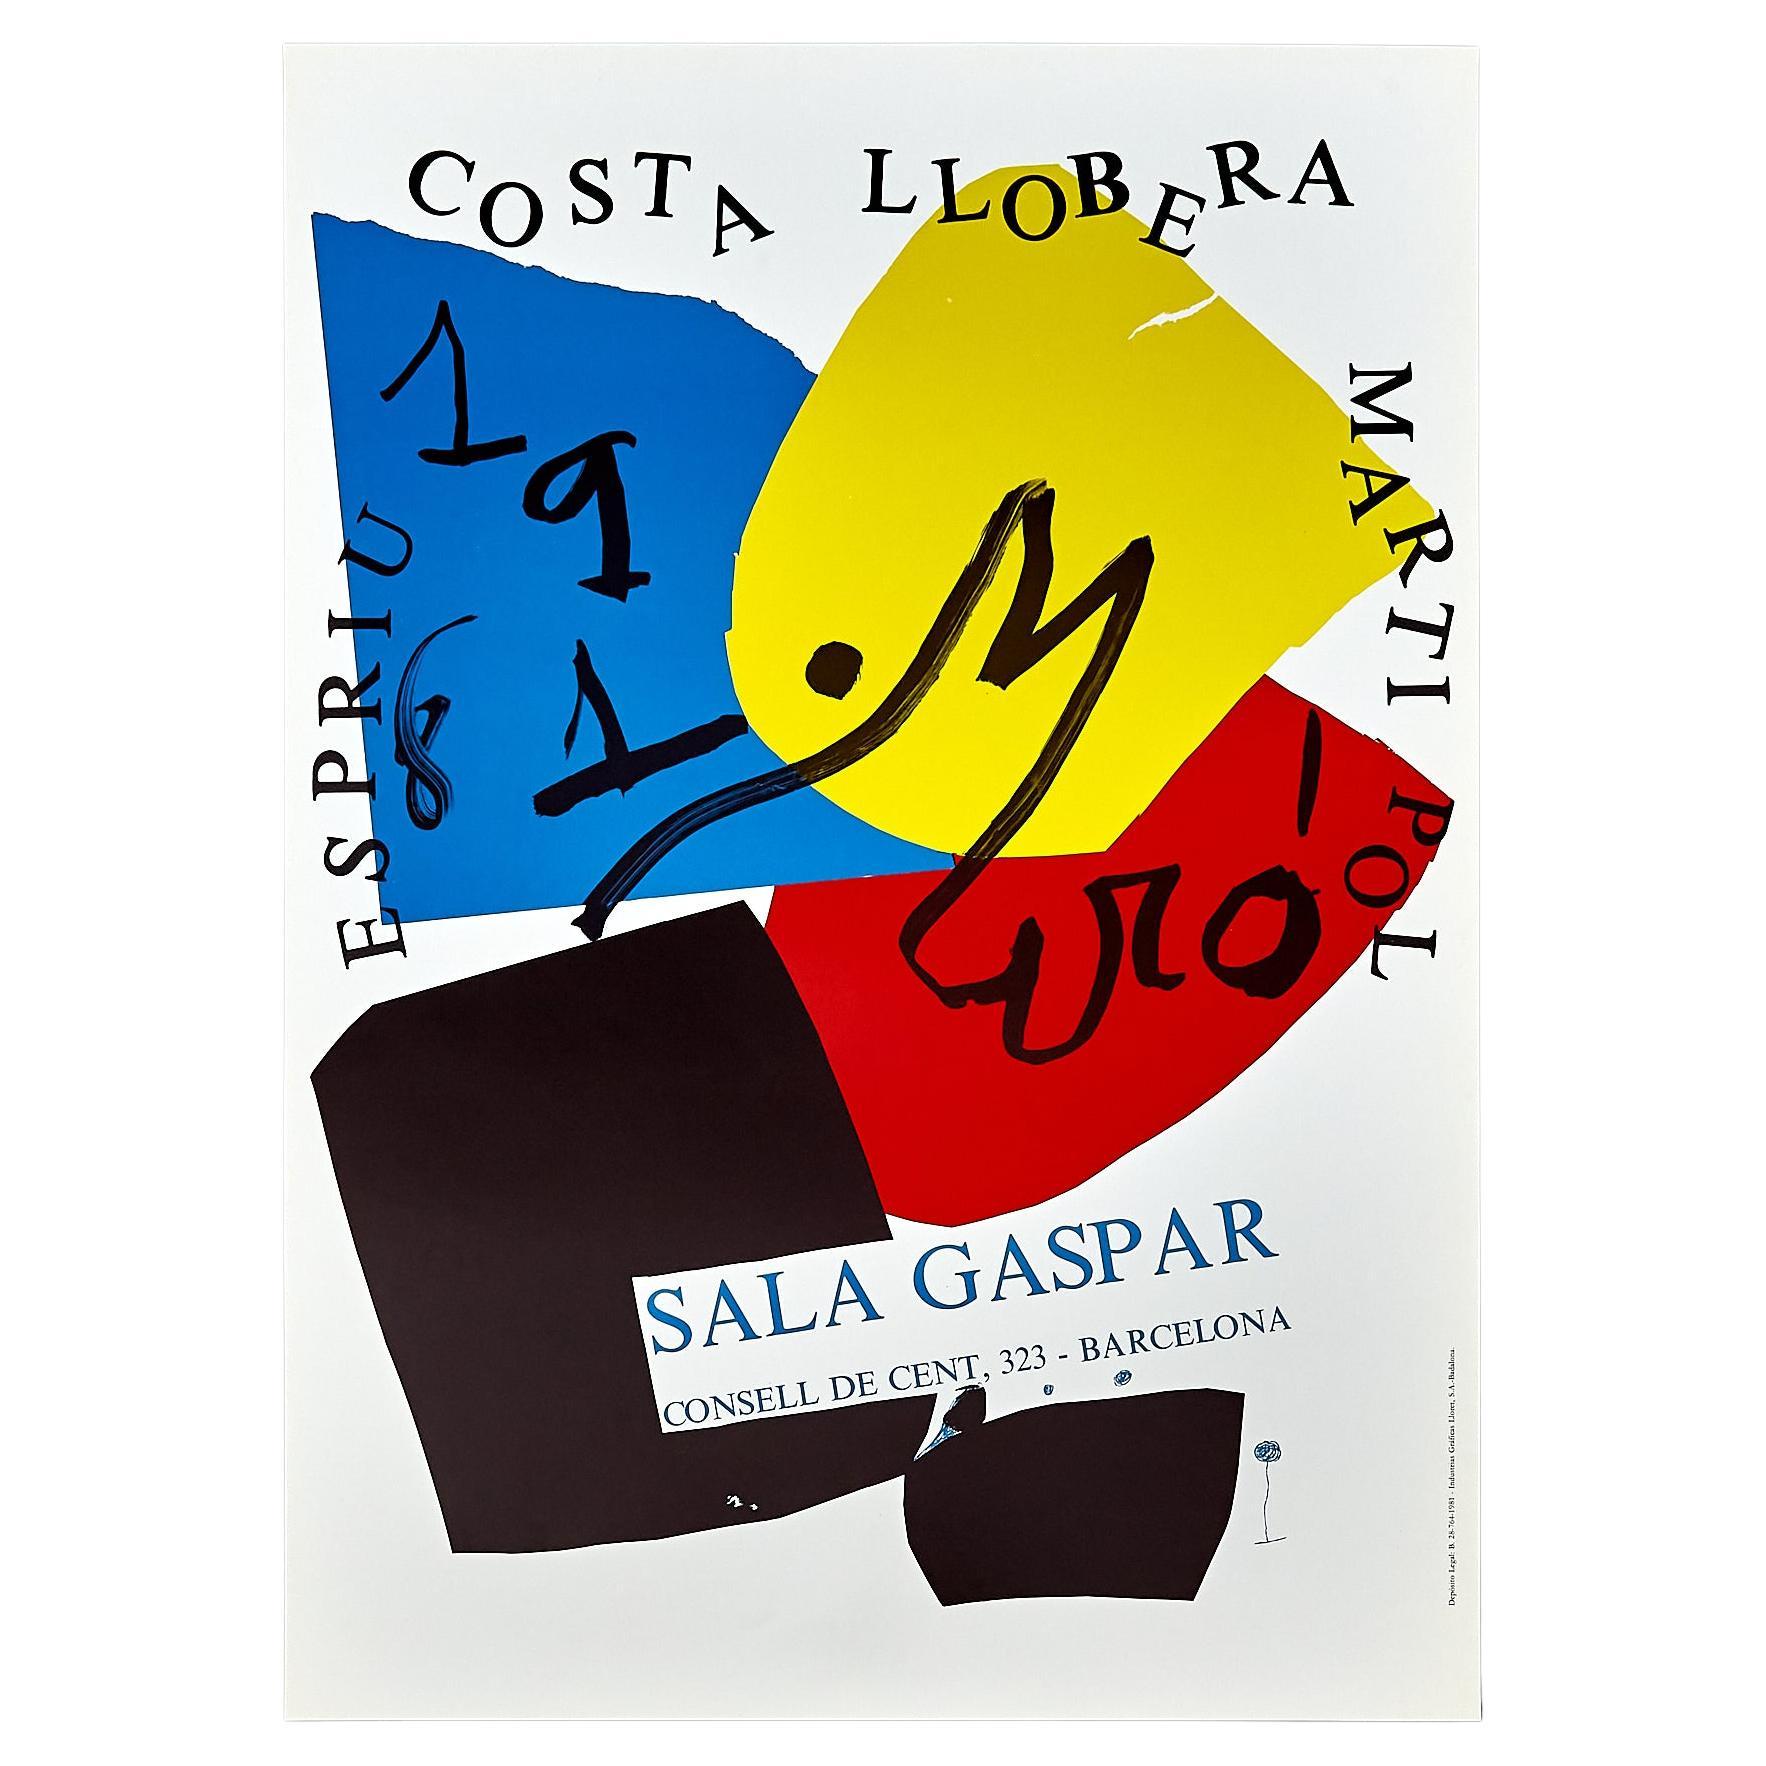 Poster of Costa Llobera by Joan Miró, circa 1981. For Sale